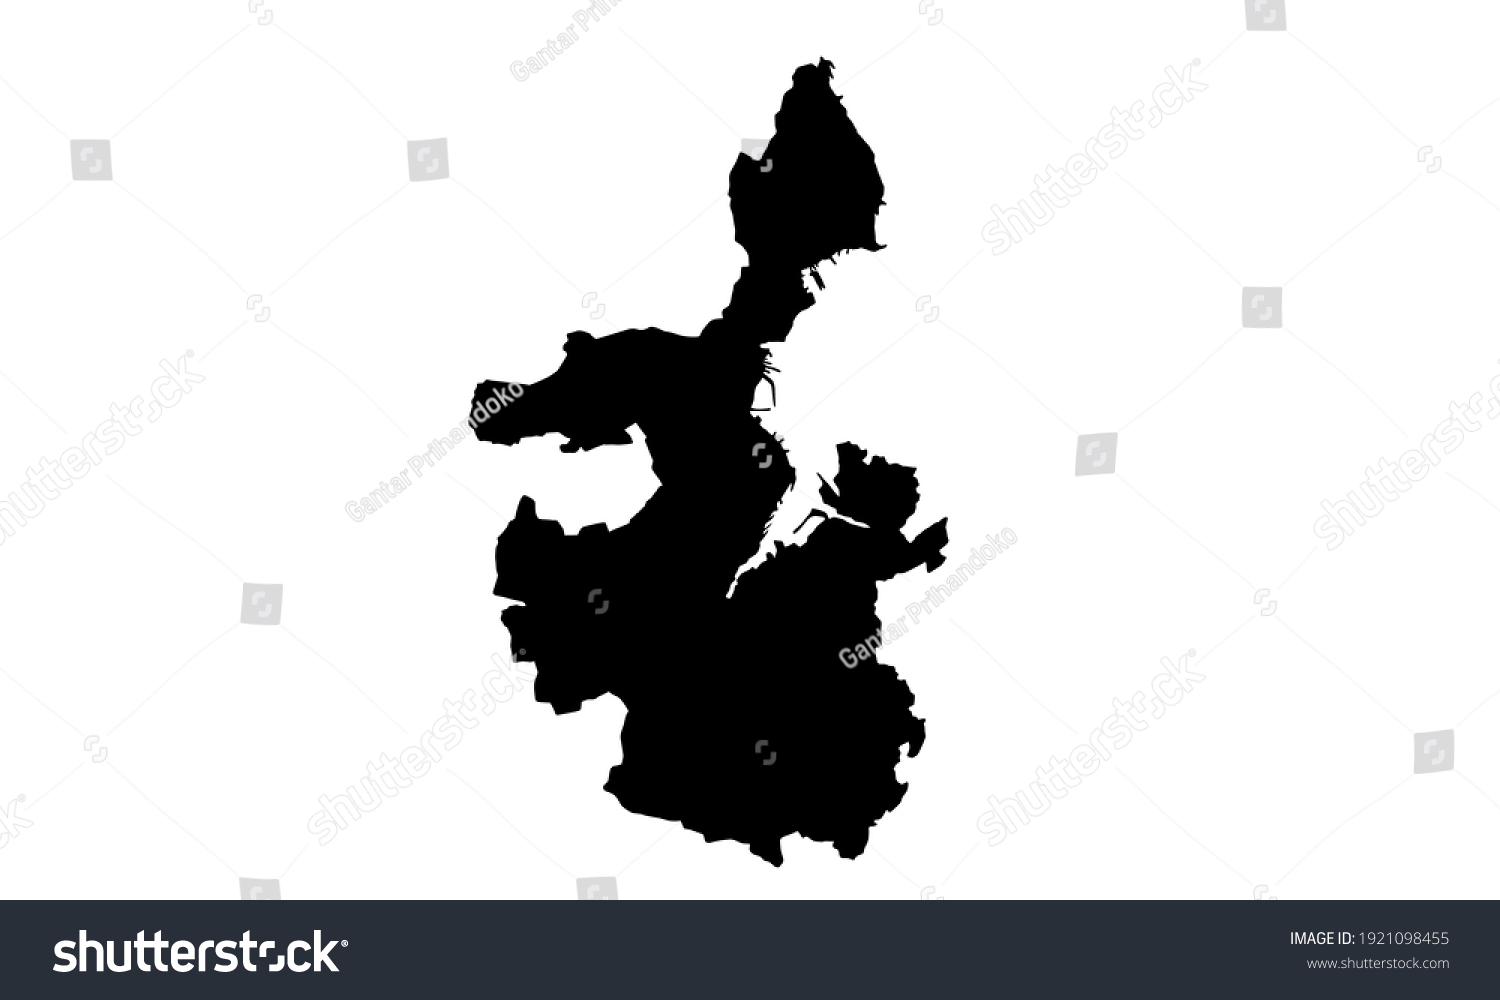 SVG of black silhouette of a map of the city of Kiel in Germany on a white background svg